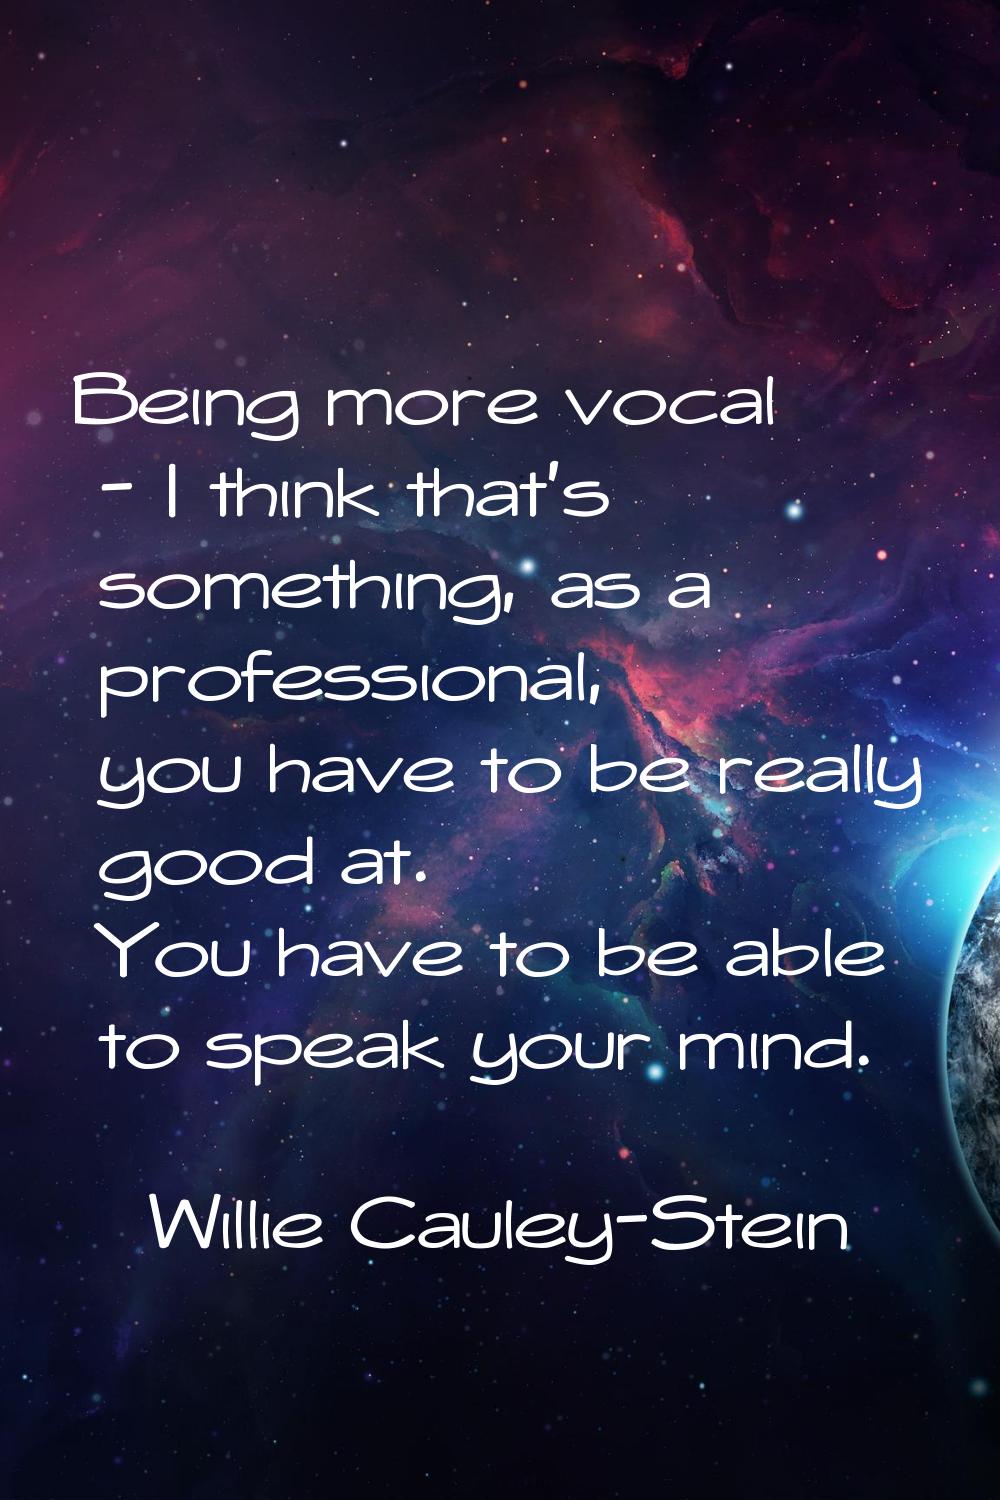 Being more vocal - I think that's something, as a professional, you have to be really good at. You 